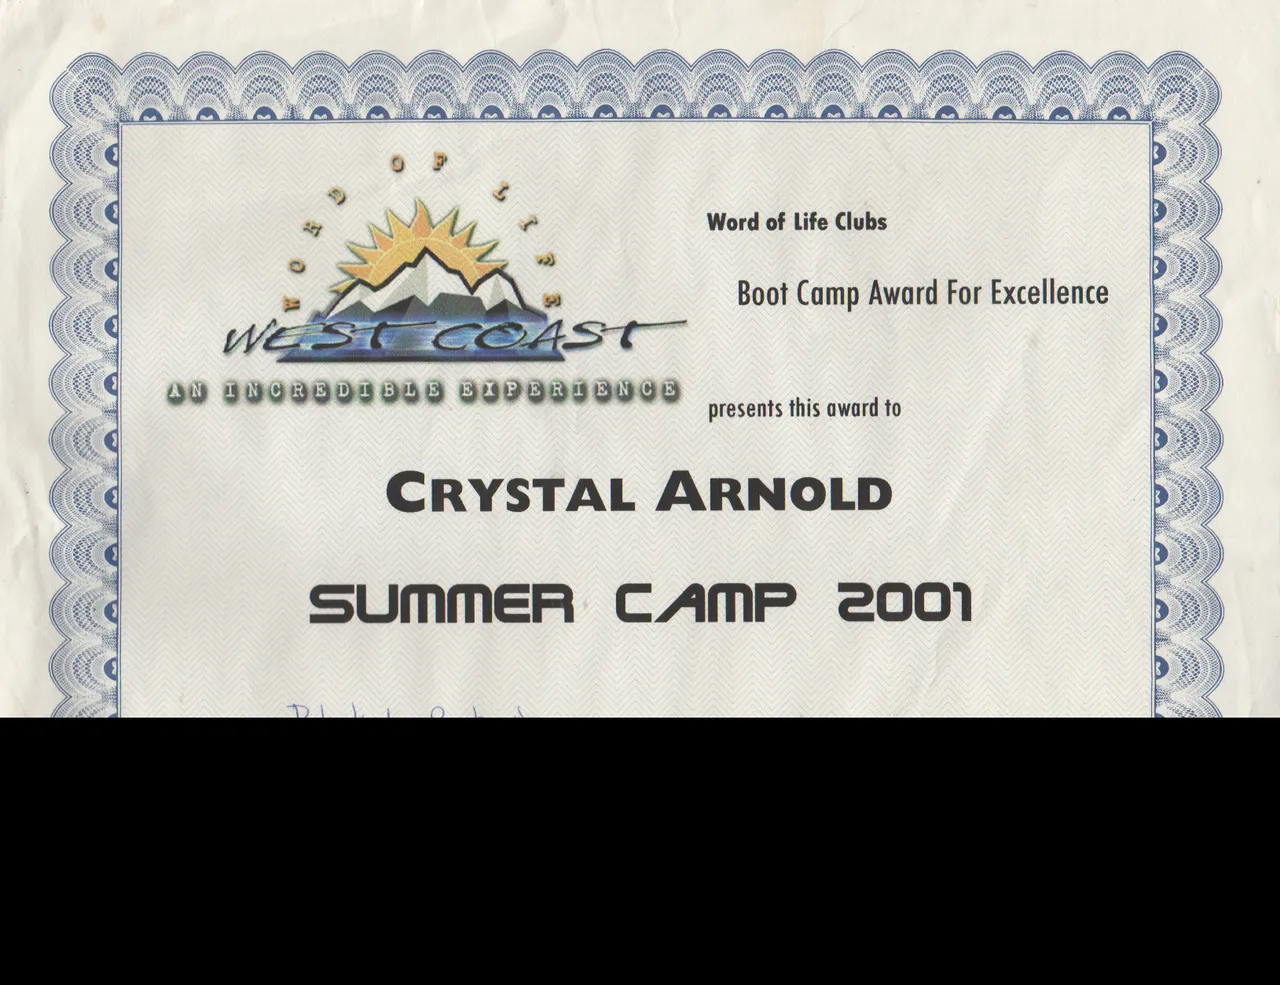 2001-07 - West Coast Camp, Boot Camp Award For Excellence, Crystal Arnold.png